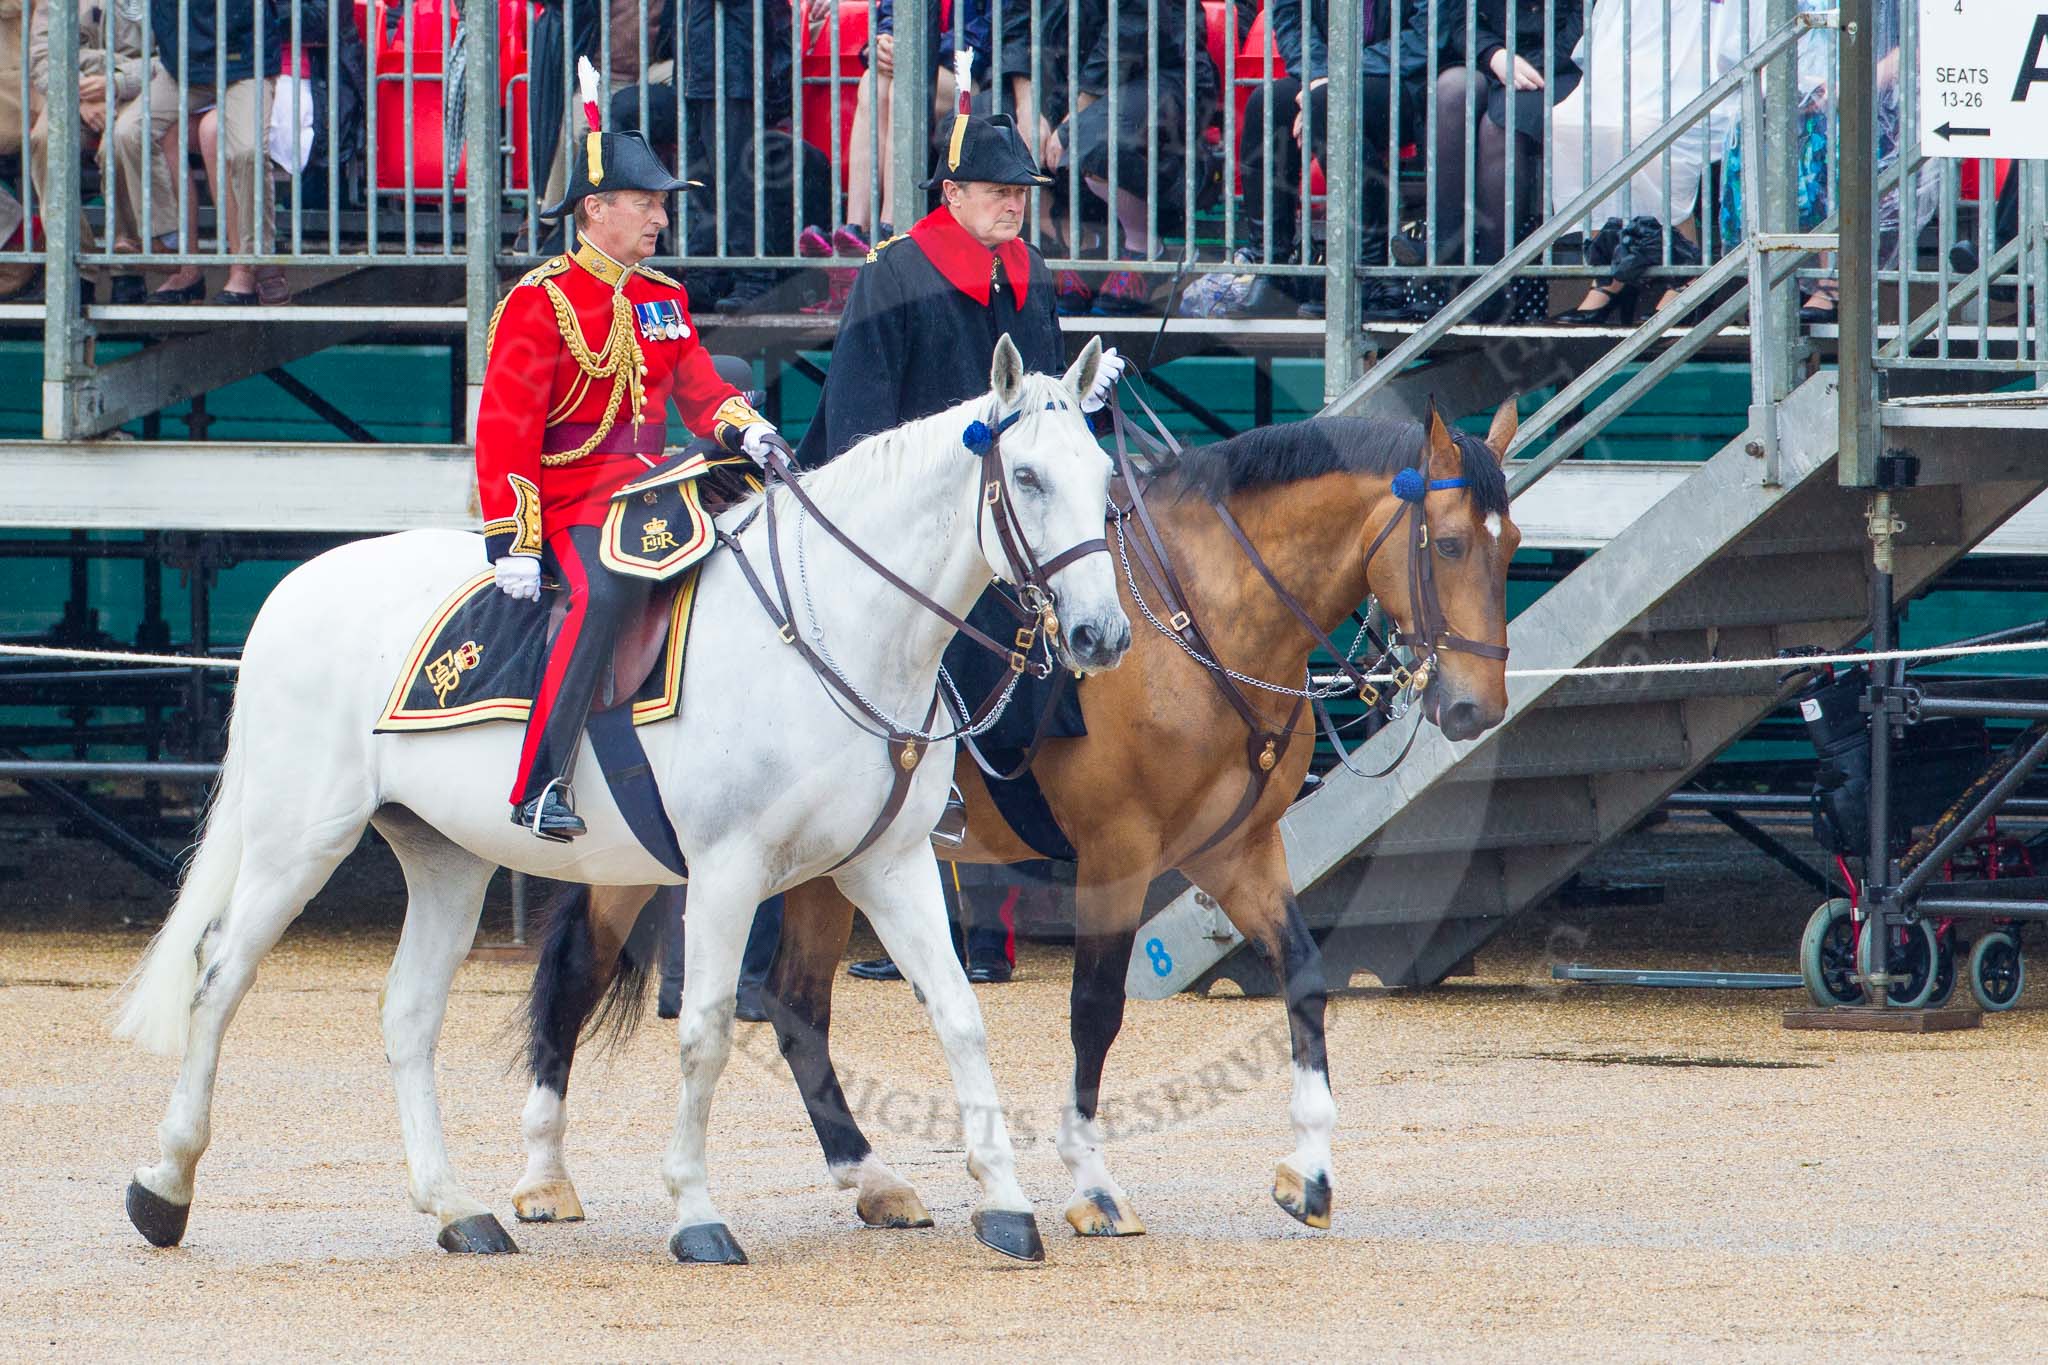 The Colonel's Review 2014.
Horse Guards Parade, Westminster,
London,

United Kingdom,
on 07 June 2014 at 10:58, image #251